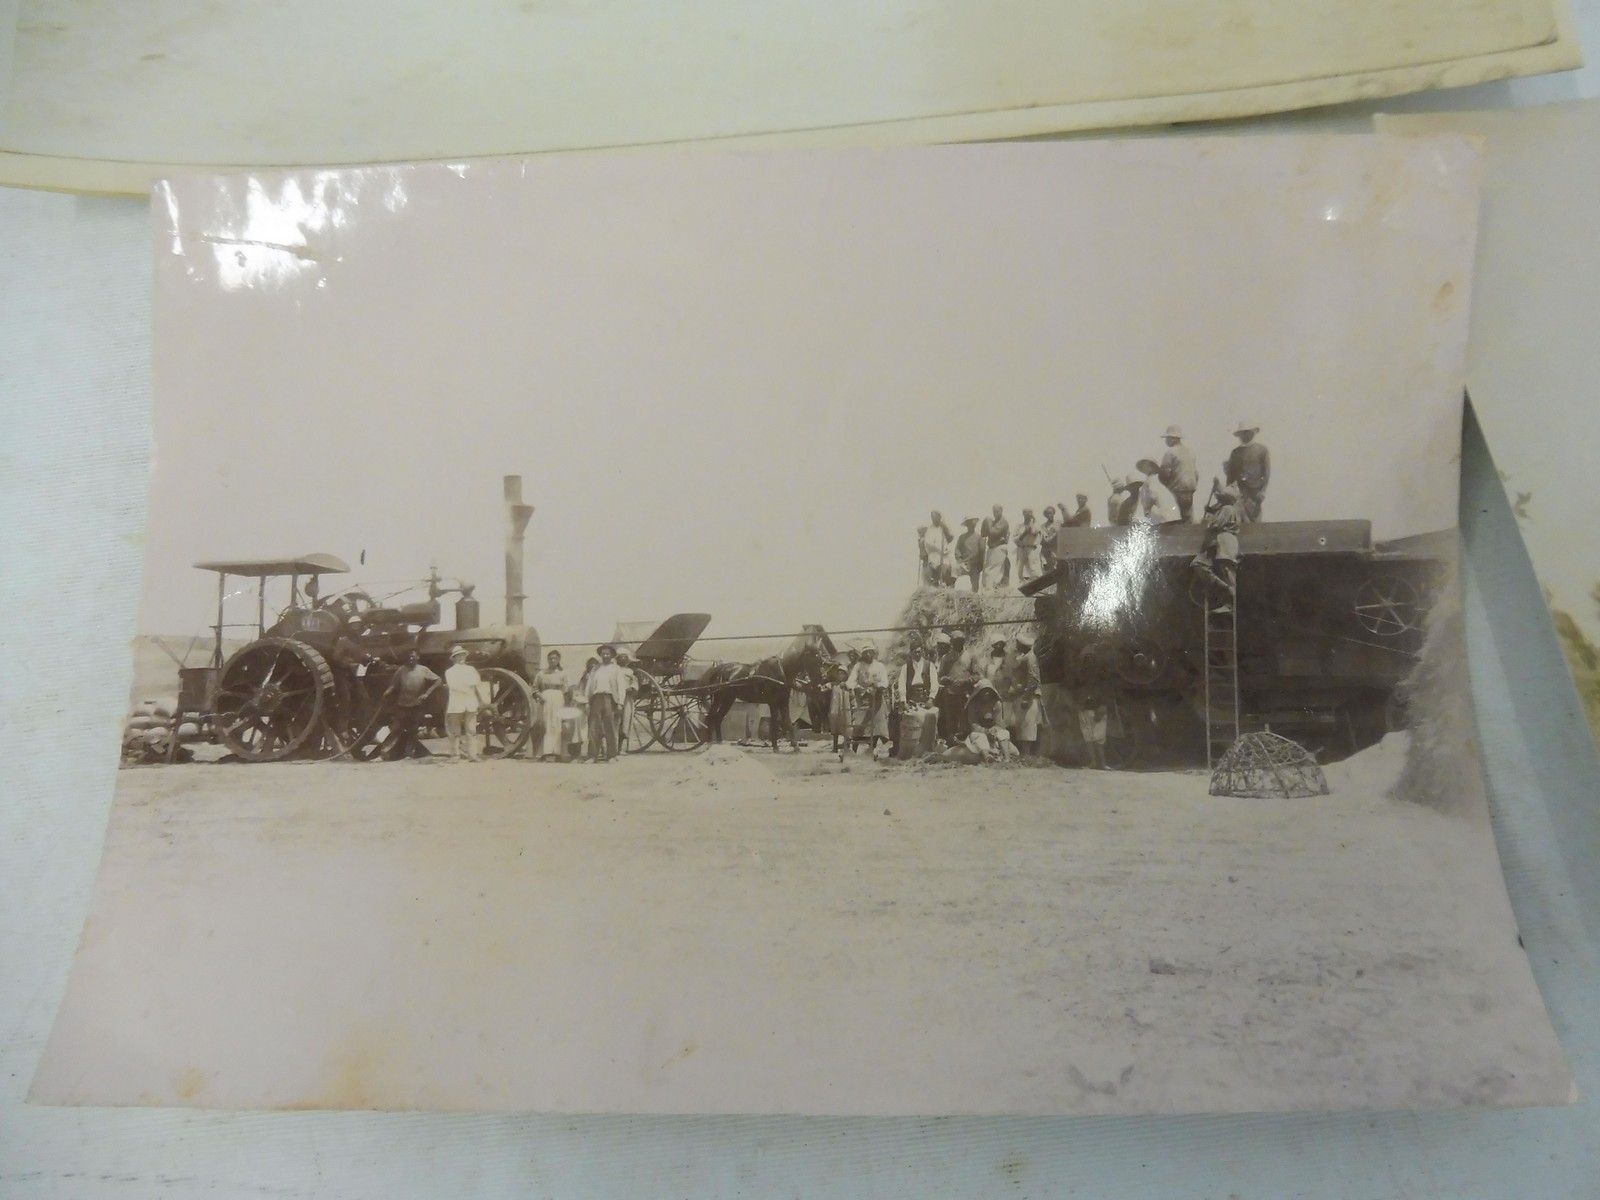 Traction/Steam Engine and Agricultural interest - eight larger scale photographs, three depicting an - Image 4 of 7